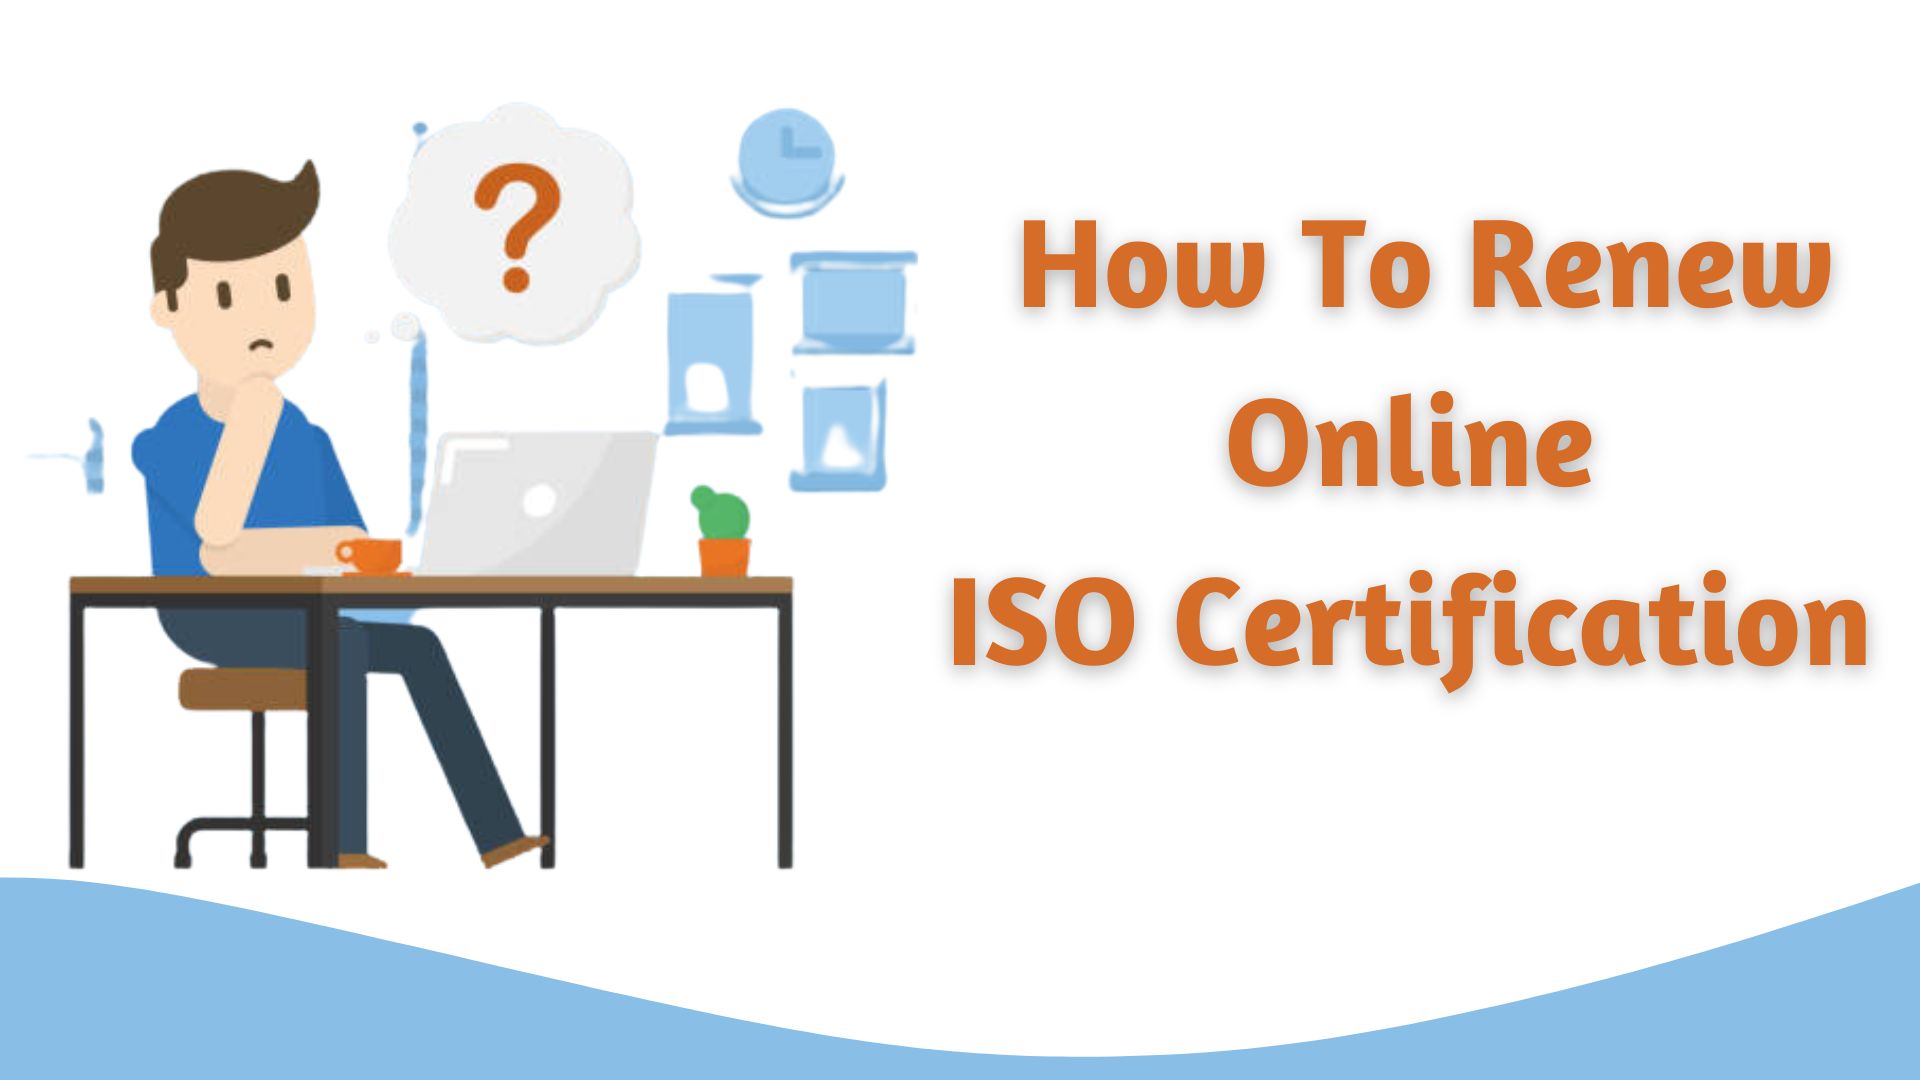 How to renew online ISO Certification renewal